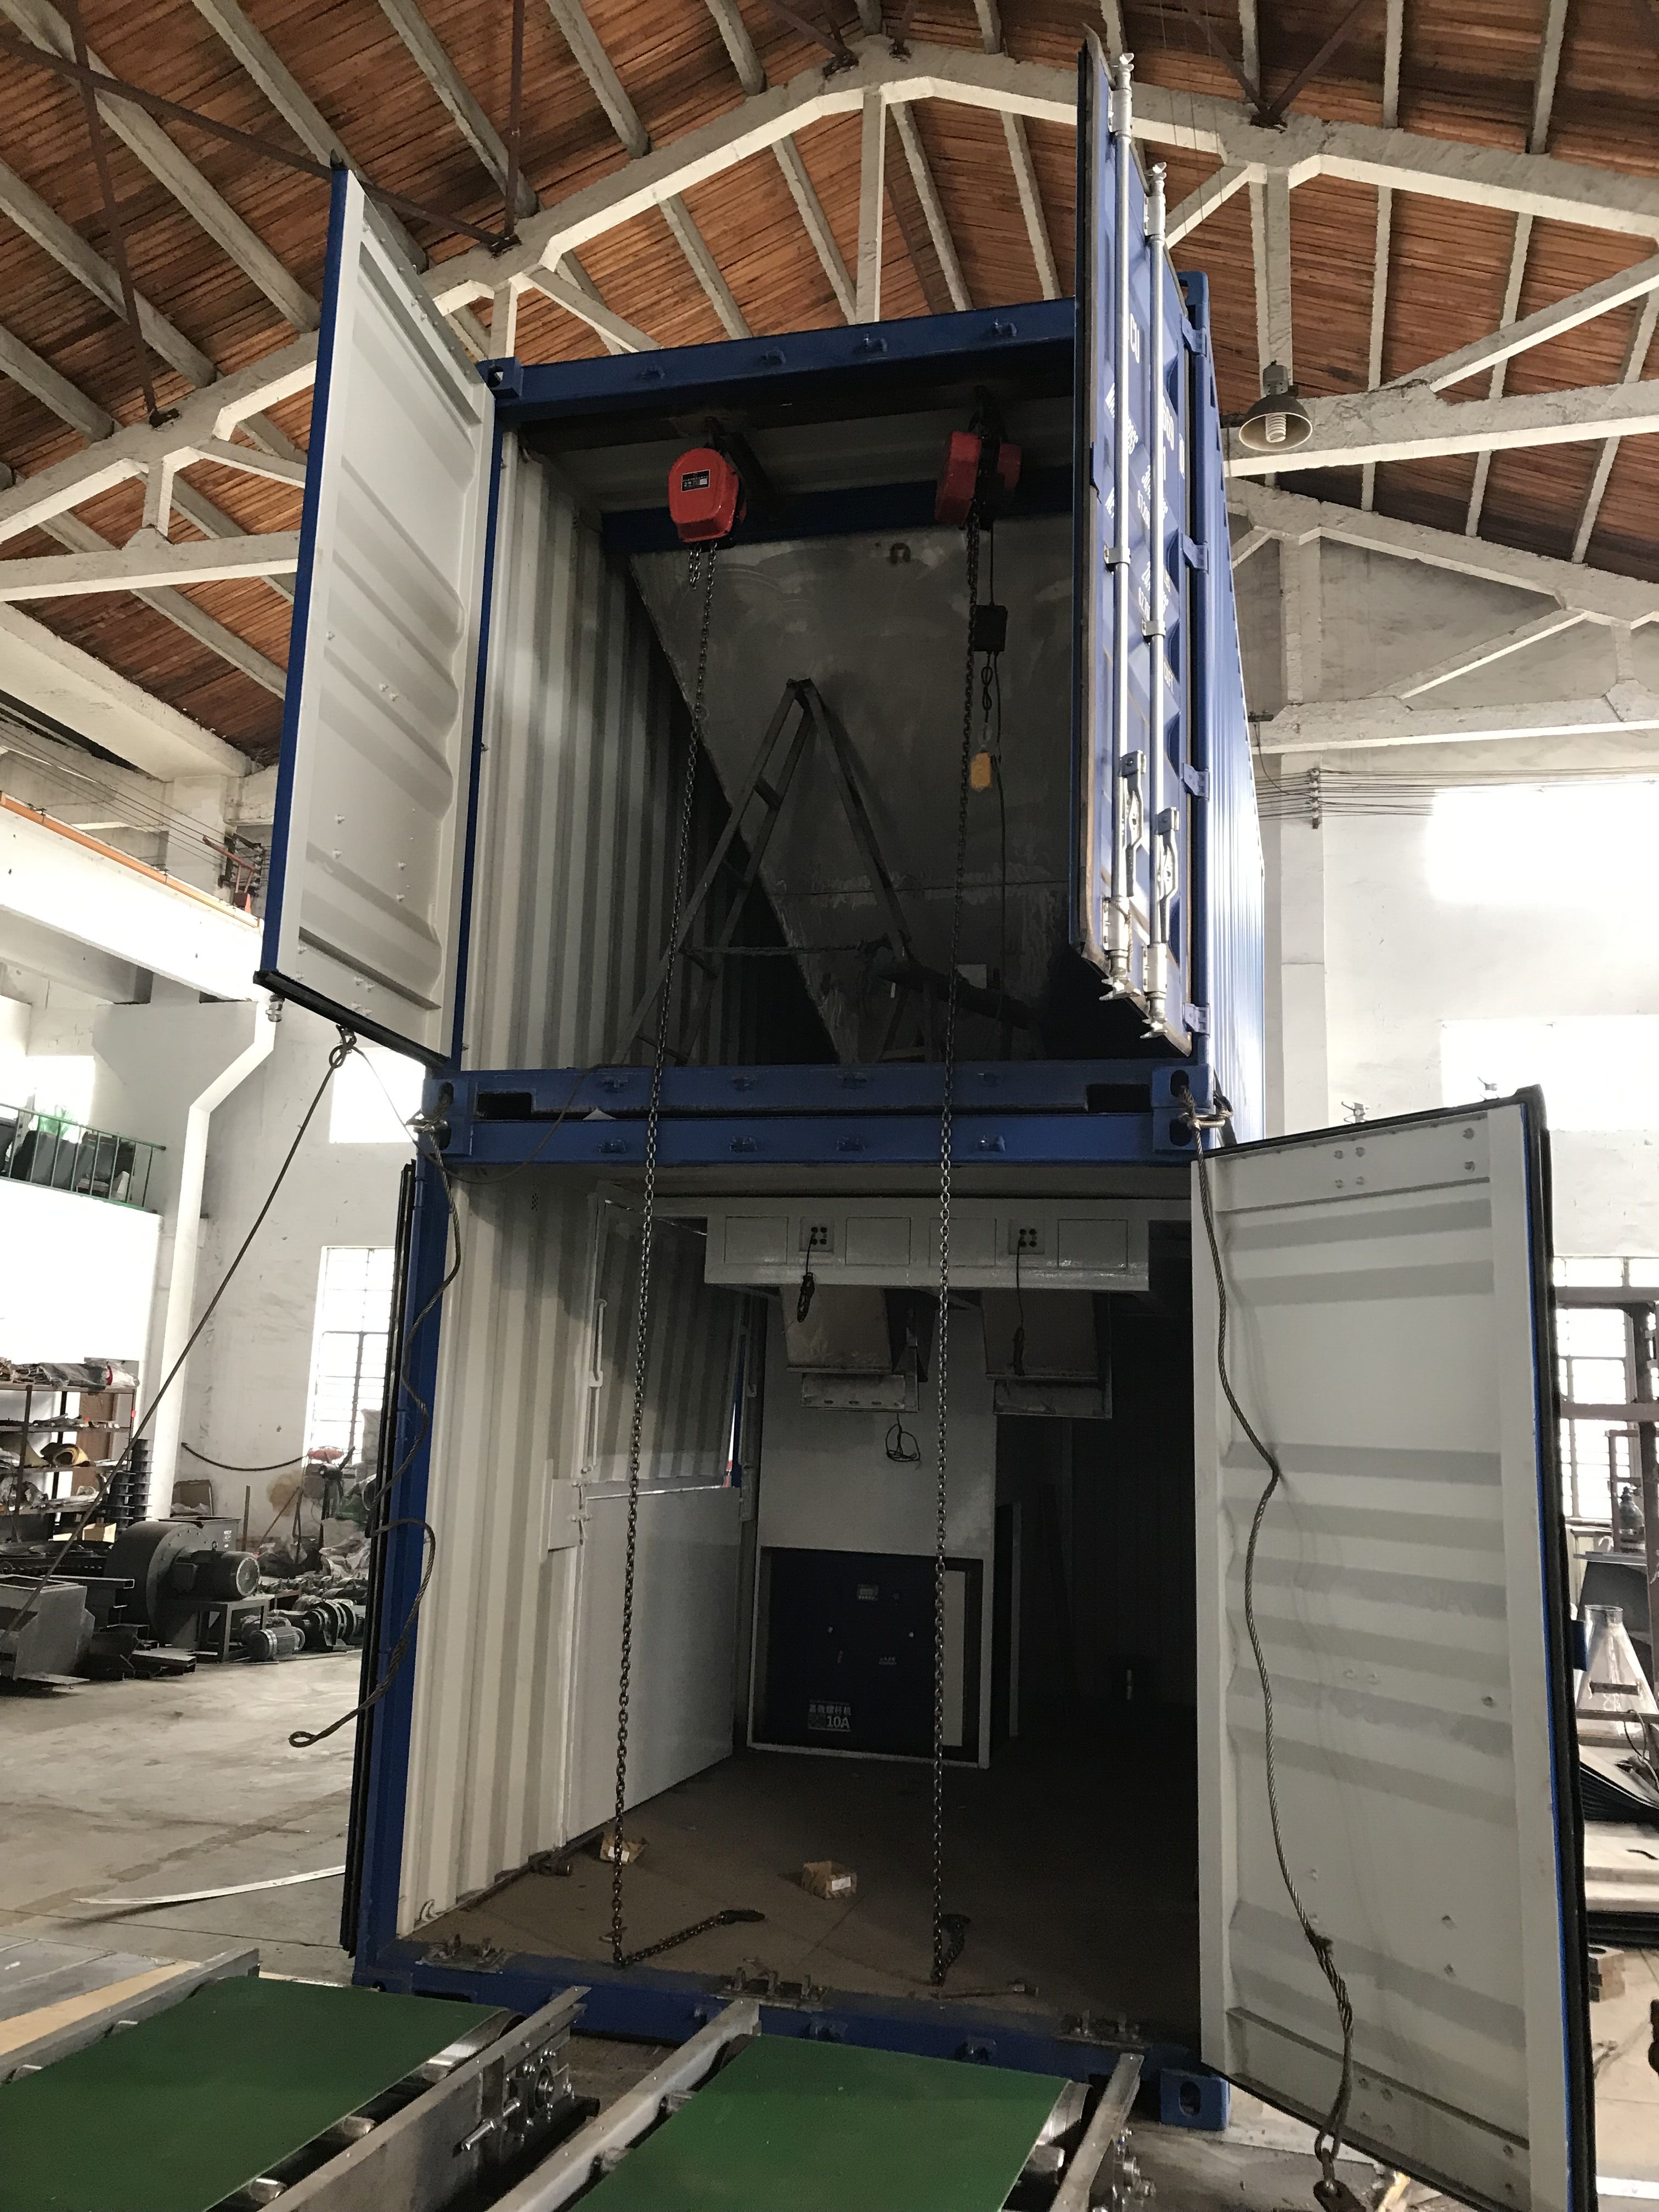 Fully Automatic Packing Palletizing Line, Fully Automatic Packing System, Containerised Bagging System, Mobile Bagging Unit, Mobile Containserized Bagging Unit, Fully Automatic Packing System, Wuxi HY